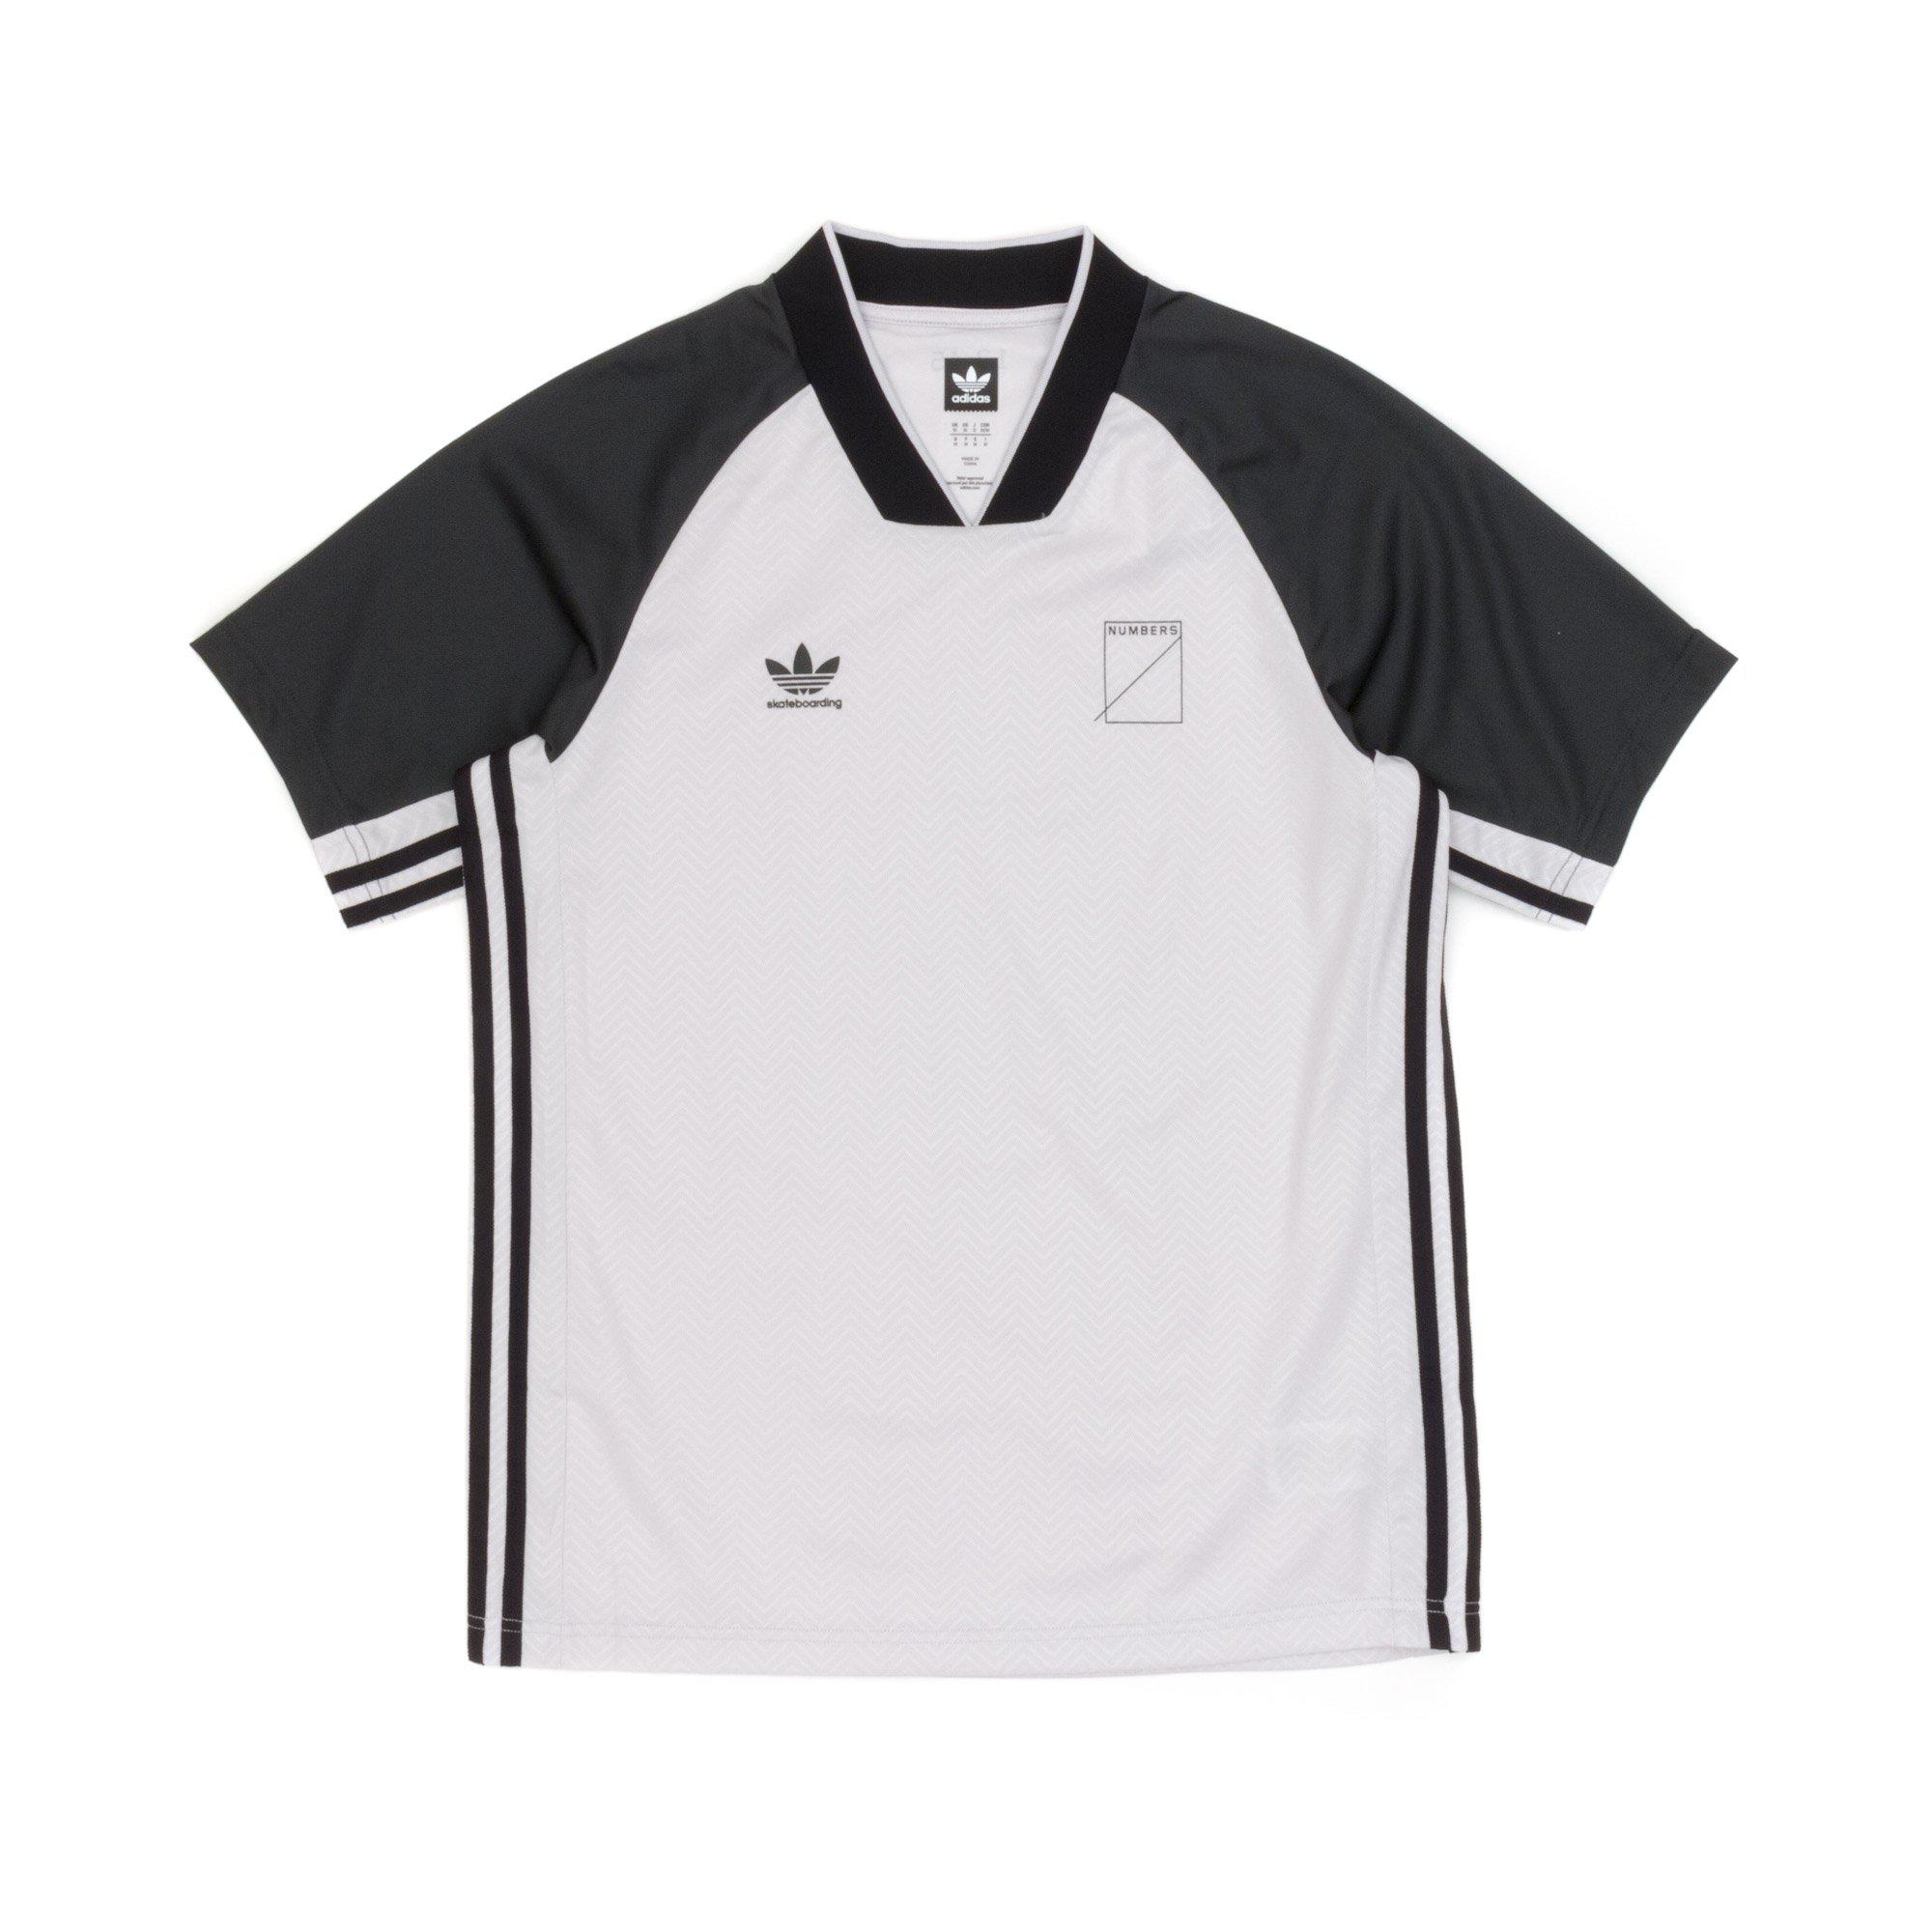 adidas X Numbers Edition Jersey in Grey (Gray) for Men - Lyst